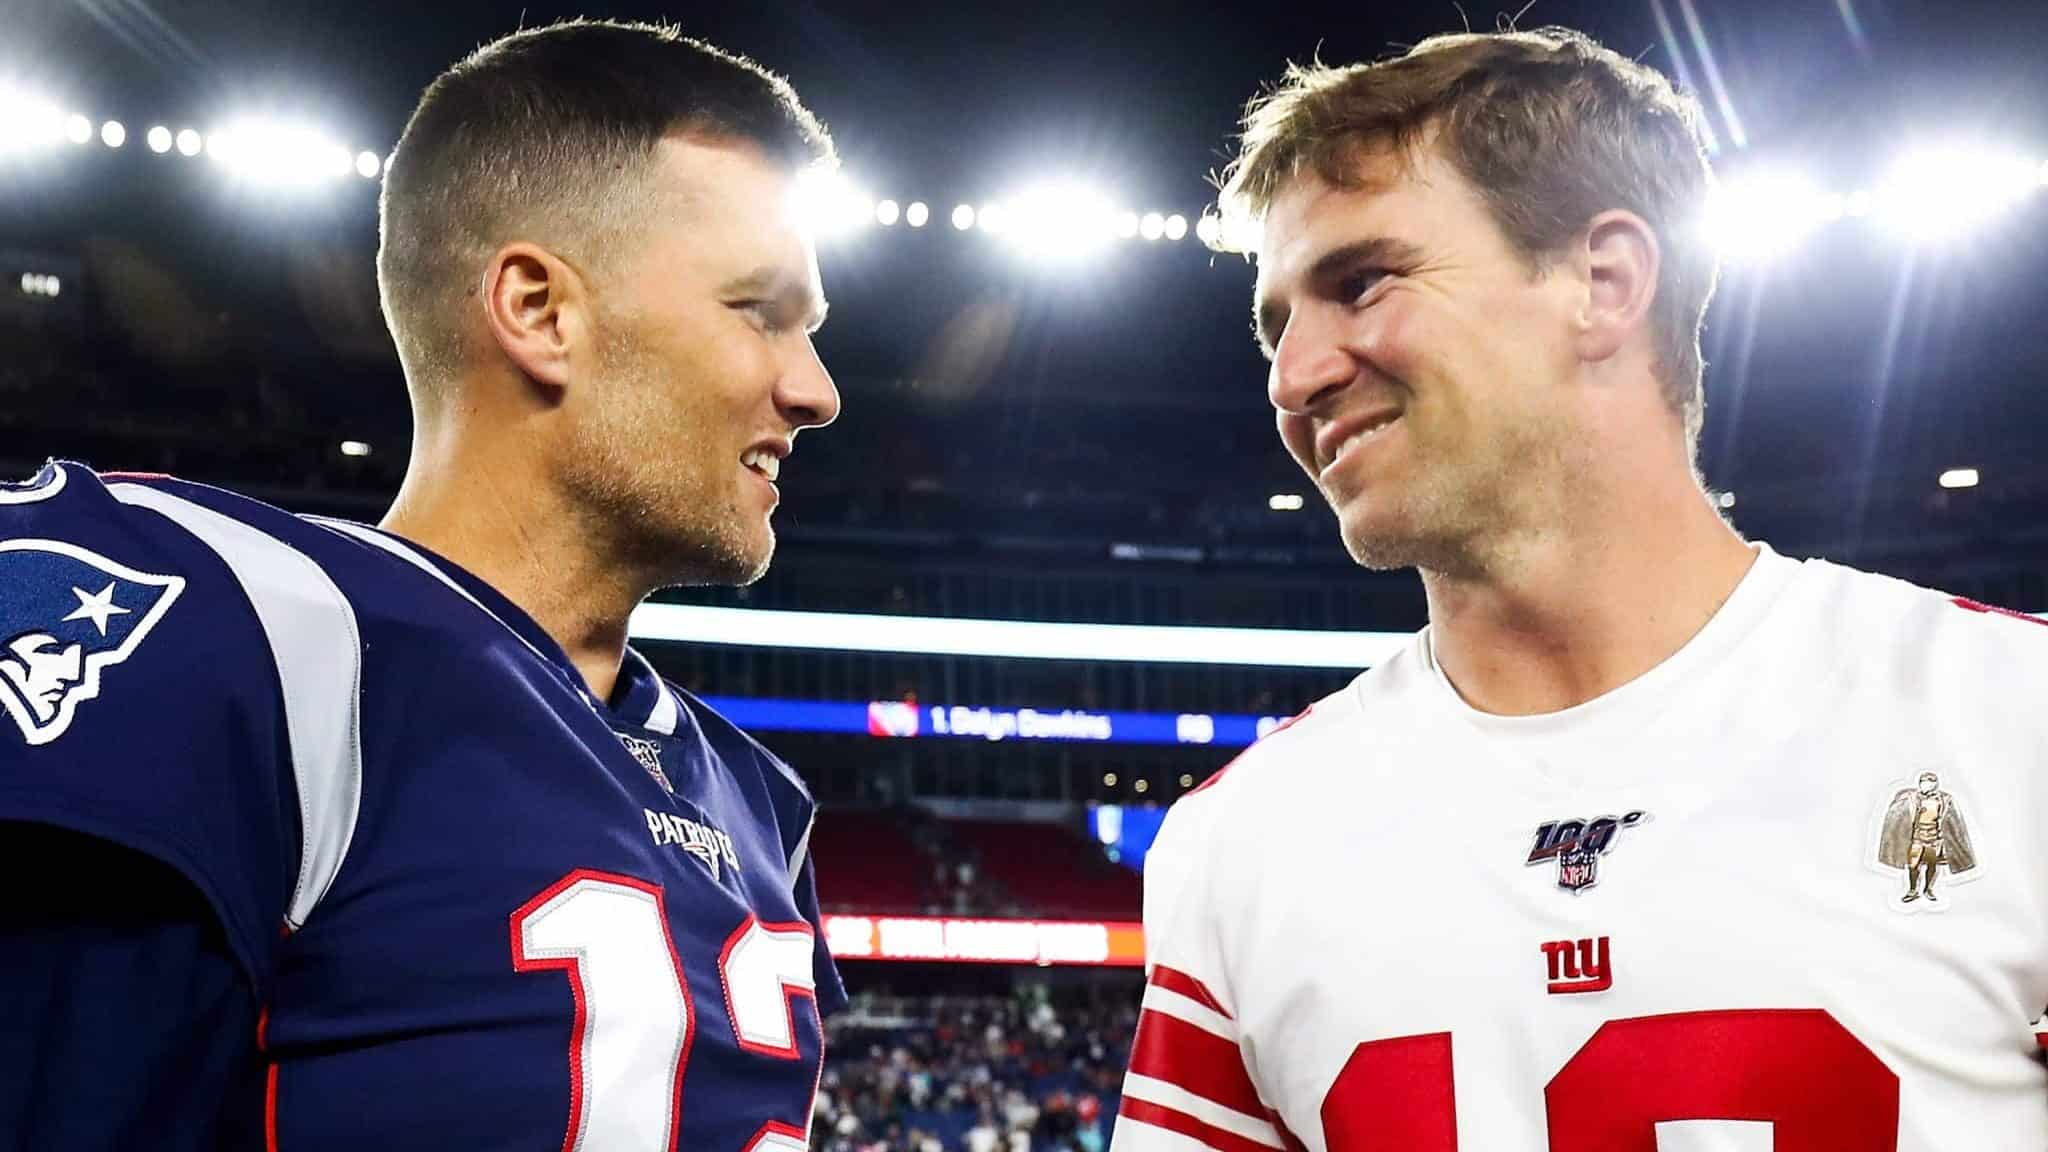 FOXBOROUGH, MA - AUGUST 29: Tom Brady #12 of the New England Patriots greets Eli Manning #10 of the New York Giants after a preseason game at Gillette Stadium on August 29, 2019 in Foxborough, Massachusetts.